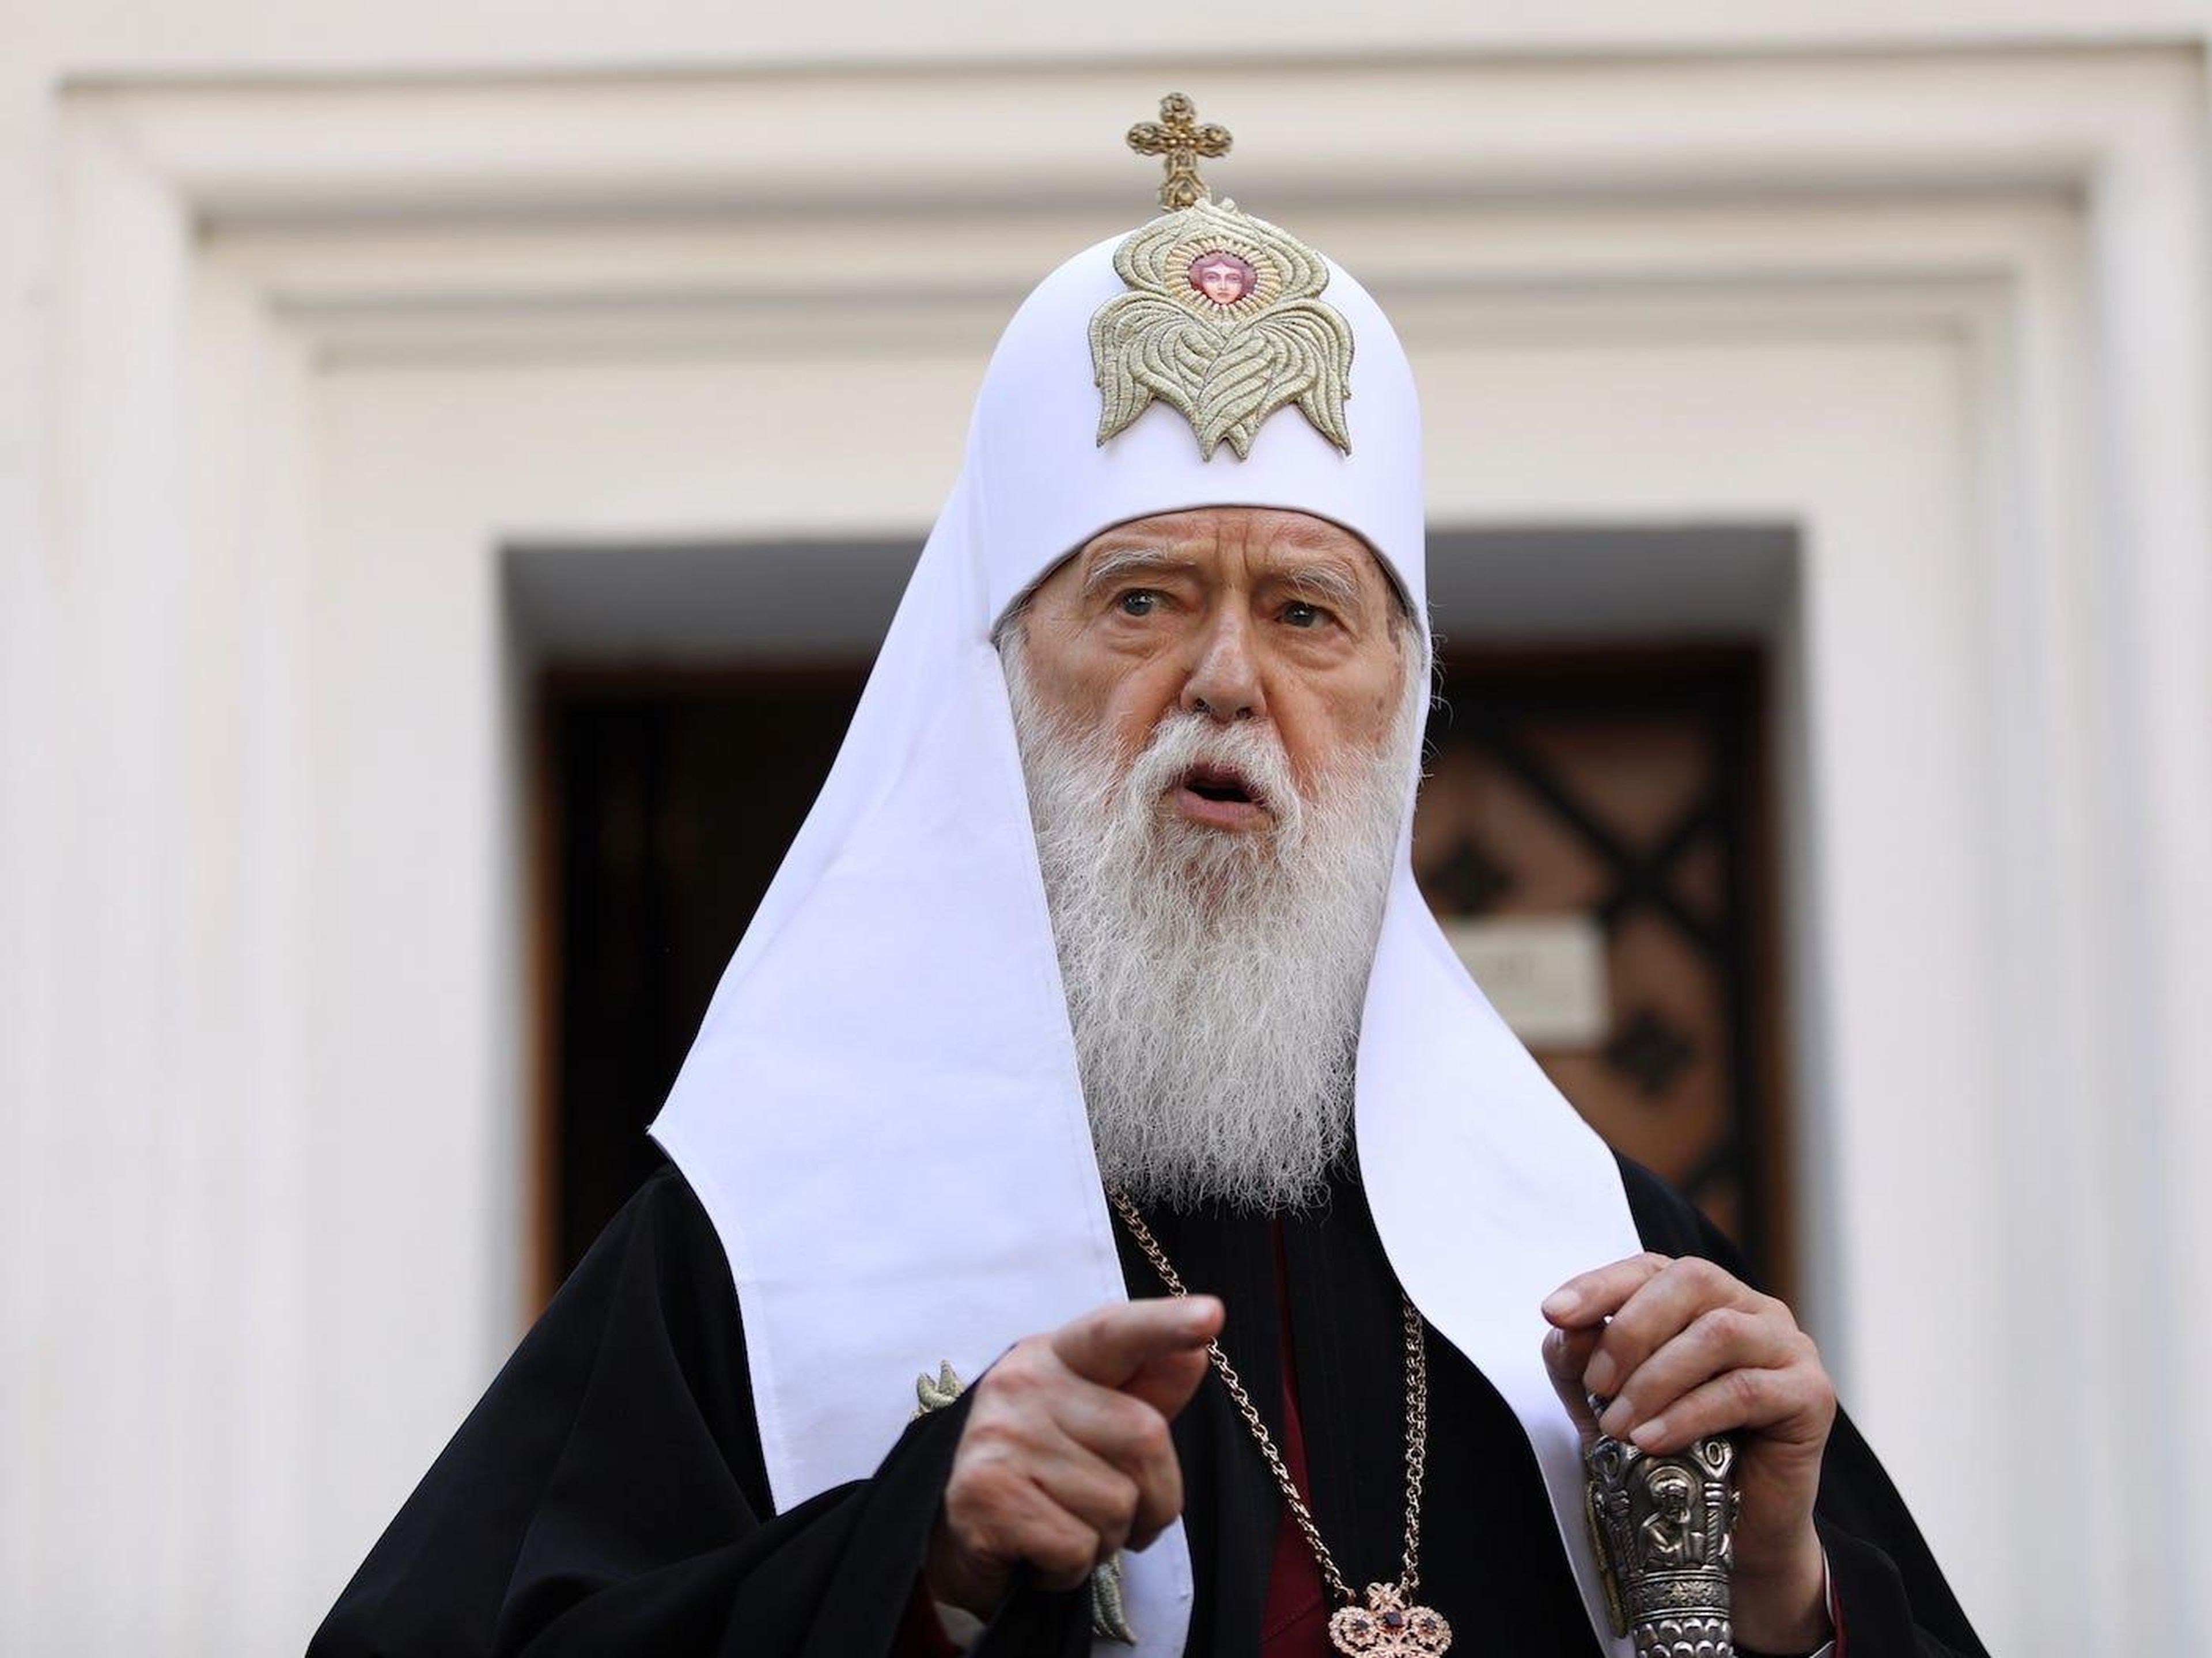 The honorable patriarch of the Orthodox Church of Ukraine, Filaret, after a meeting of the Synod in Kiev, Ukraine on Friday, May 24, 2019. Danil Shamkin/NurPhoto via Getty Images